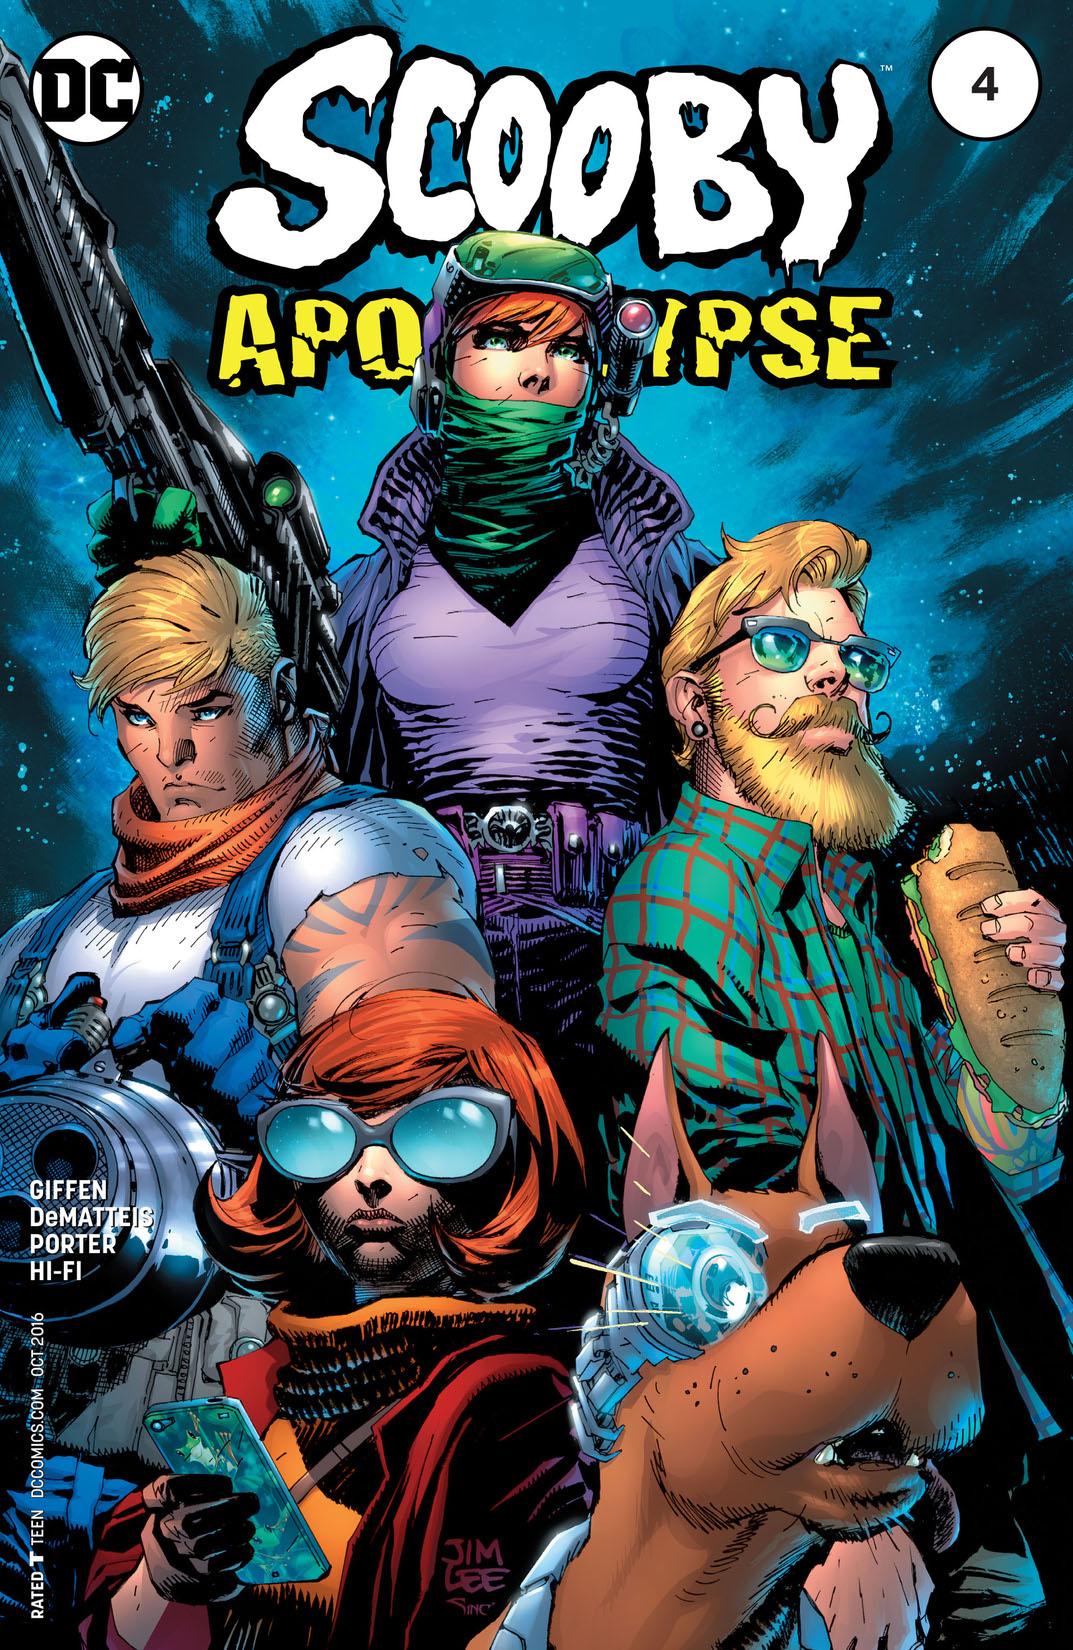 Scooby Apocalypse #4 preview images